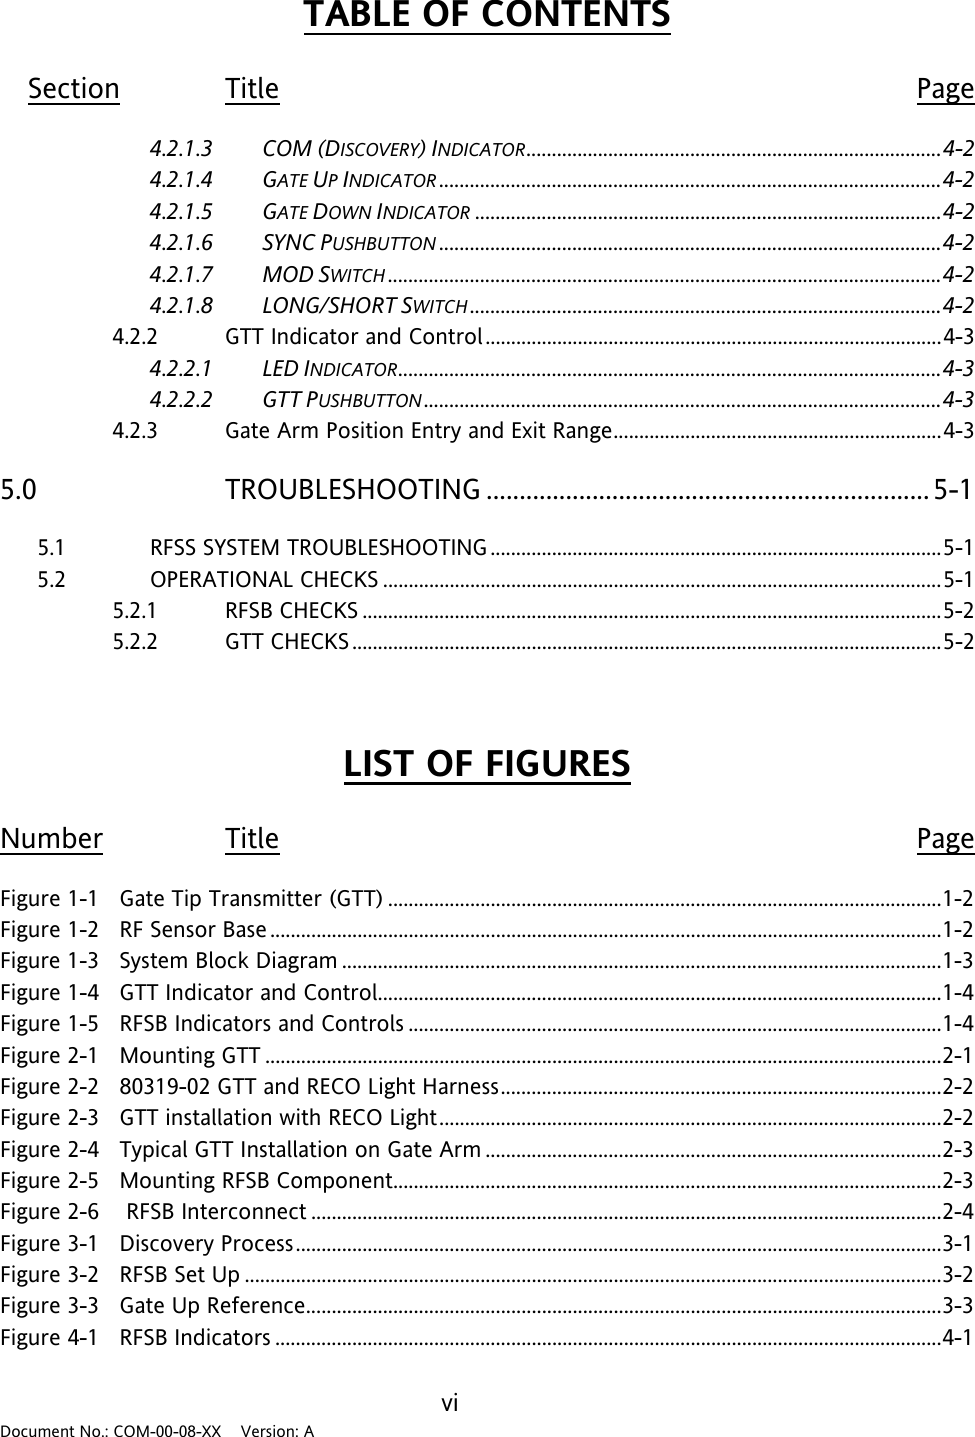 TABLE OF CONTENTS  Section Title Page 4.2.1.3 COM (DISCOVERY) INDICATOR.................................................................................4-24.2.1.4 GATE UP INDICATOR ..................................................................................................4-24.2.1.5 GATE DOWN INDICATOR ...........................................................................................4-24.2.1.6 SYNC PUSHBUTTON ..................................................................................................4-24.2.1.7 MOD SWITCH ............................................................................................................4-24.2.1.8 LONG/SHORT SWITCH ............................................................................................4-24.2.2 GTT Indicator and Control.........................................................................................4-34.2.2.1 LED INDICATOR..........................................................................................................4-34.2.2.2 GTT PUSHBUTTON .....................................................................................................4-34.2.3 Gate Arm Position Entry and Exit Range................................................................4-35.0 TROUBLESHOOTING ................................................................... 5-1 5.1 RFSS SYSTEM TROUBLESHOOTING........................................................................................5-15.2 OPERATIONAL CHECKS .............................................................................................................5-15.2.1 RFSB CHECKS .................................................................................................................5-25.2.2 GTT CHECKS ...................................................................................................................5-2    LIST OF FIGURES  Number Title Page Figure 1-1   Gate Tip Transmitter (GTT) ............................................................................................................1-2 Figure 1-2   RF Sensor Base ...................................................................................................................................1-2 Figure 1-3   System Block Diagram .....................................................................................................................1-3 Figure 1-4   GTT Indicator and Control..............................................................................................................1-4 Figure 1-5   RFSB Indicators and Controls ........................................................................................................1-4 Figure 2-1   Mounting GTT ....................................................................................................................................2-1 Figure 2-2   80319-02 GTT and RECO Light Harness......................................................................................2-2 Figure 2-3   GTT installation with RECO Light..................................................................................................2-2 Figure 2-4   Typical GTT Installation on Gate Arm .........................................................................................2-3 Figure 2-5   Mounting RFSB Component...........................................................................................................2-3 Figure 2-6    RFSB Interconnect ...........................................................................................................................2-4 Figure 3-1   Discovery Process..............................................................................................................................3-1 Figure 3-2   RFSB Set Up ........................................................................................................................................3-2 Figure 3-3   Gate Up Reference............................................................................................................................3-3 Figure 4-1   RFSB Indicators ..................................................................................................................................4-1  vi Document No.: COM-00-08-XX    Version: A 